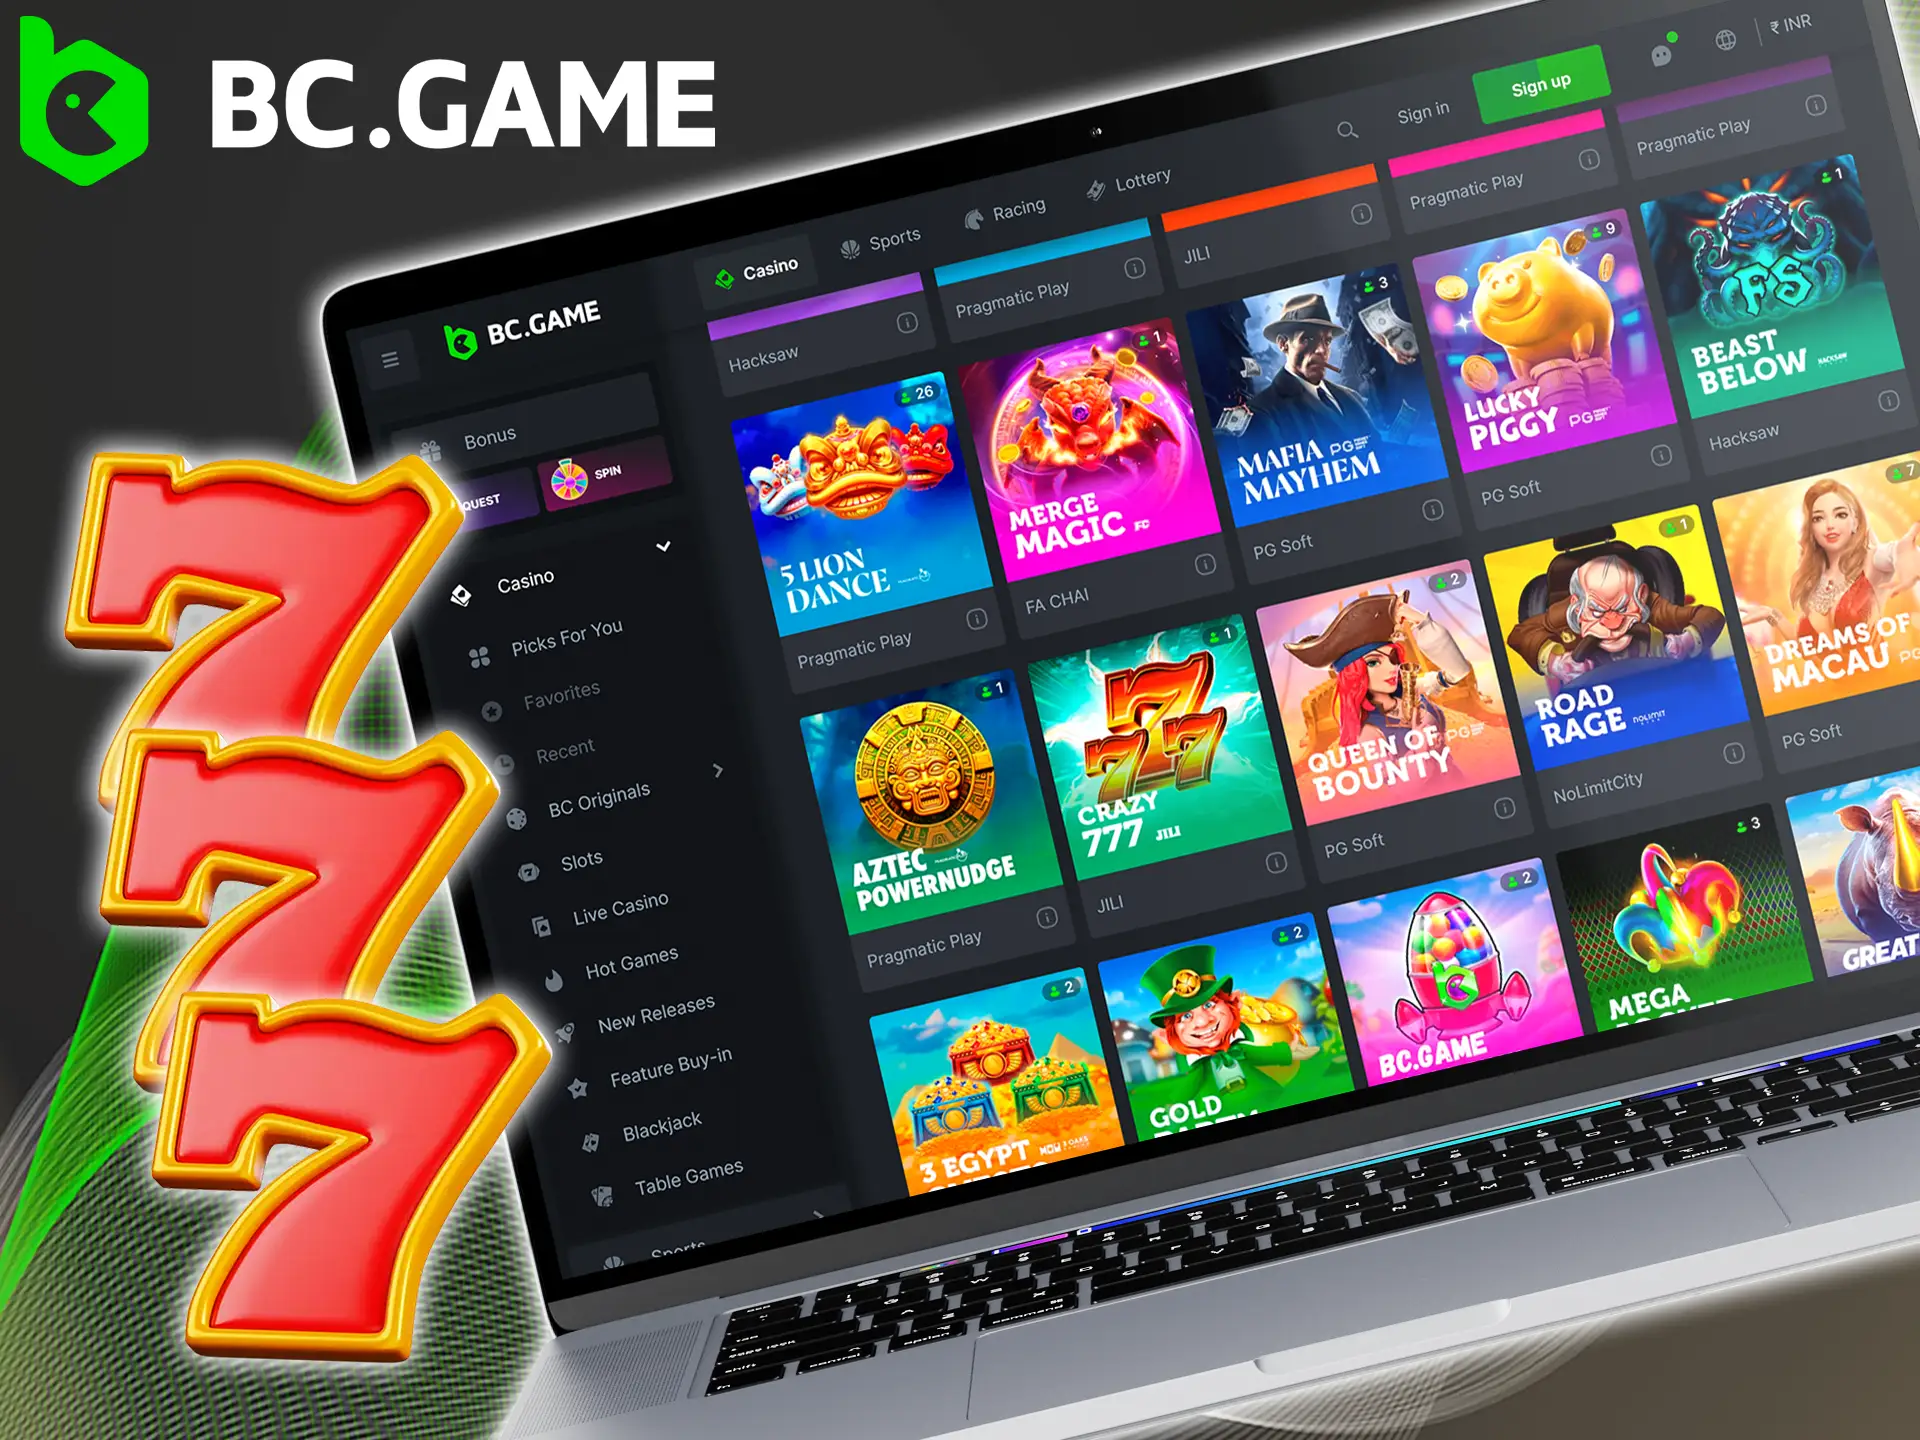 Have an unforgettable experience playing exciting slot games with BC Game.